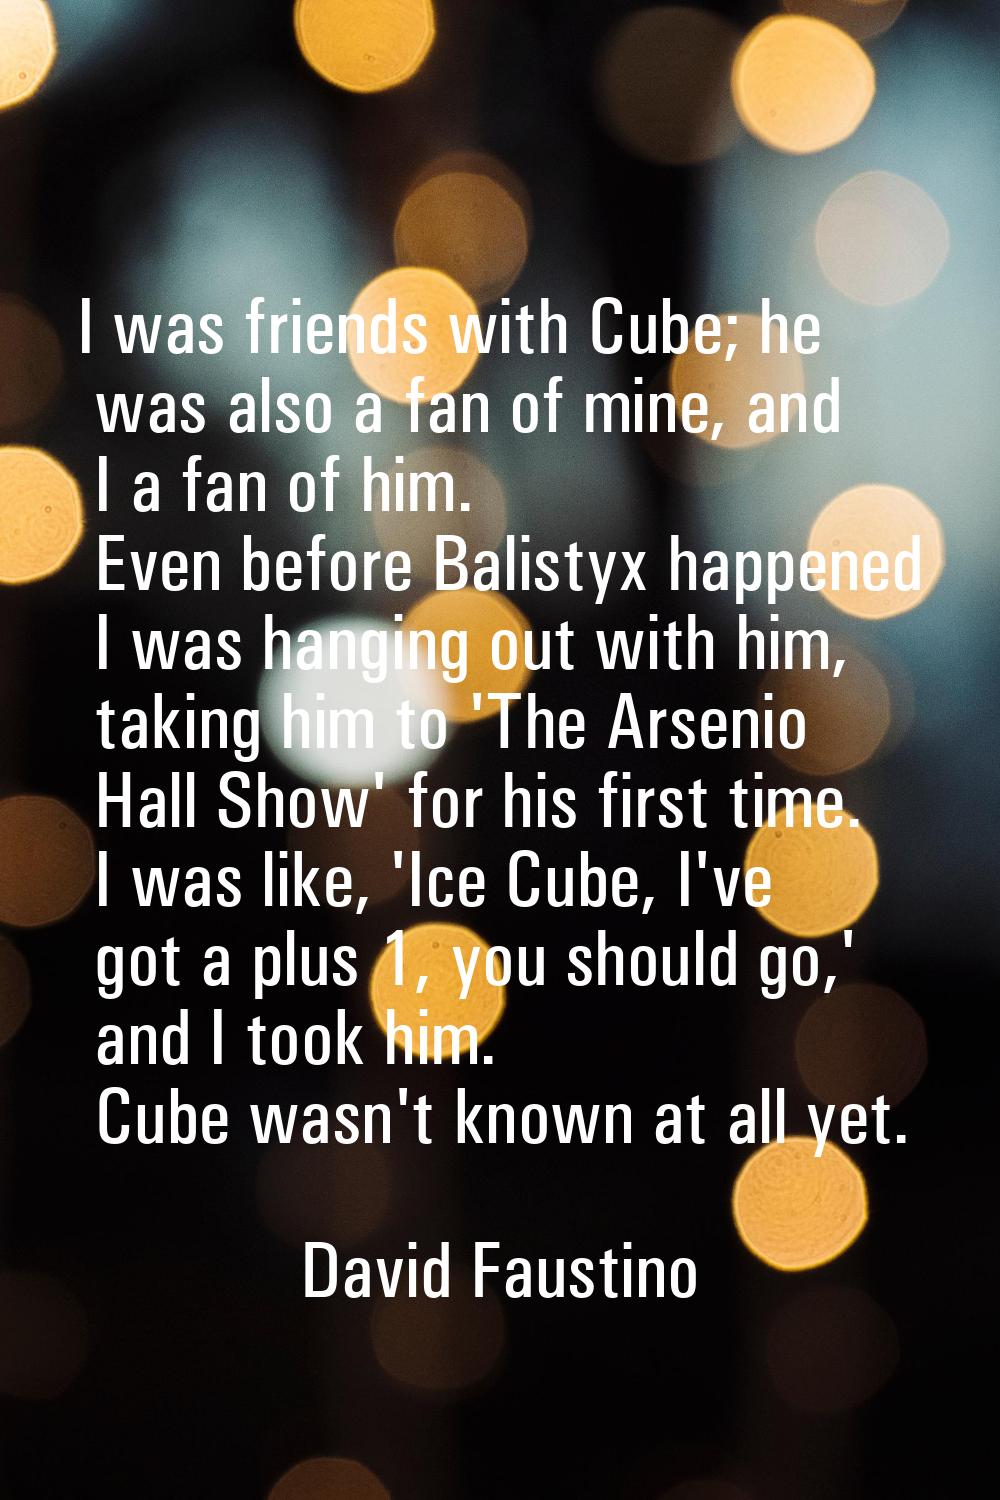 I was friends with Cube; he was also a fan of mine, and I a fan of him. Even before Balistyx happen